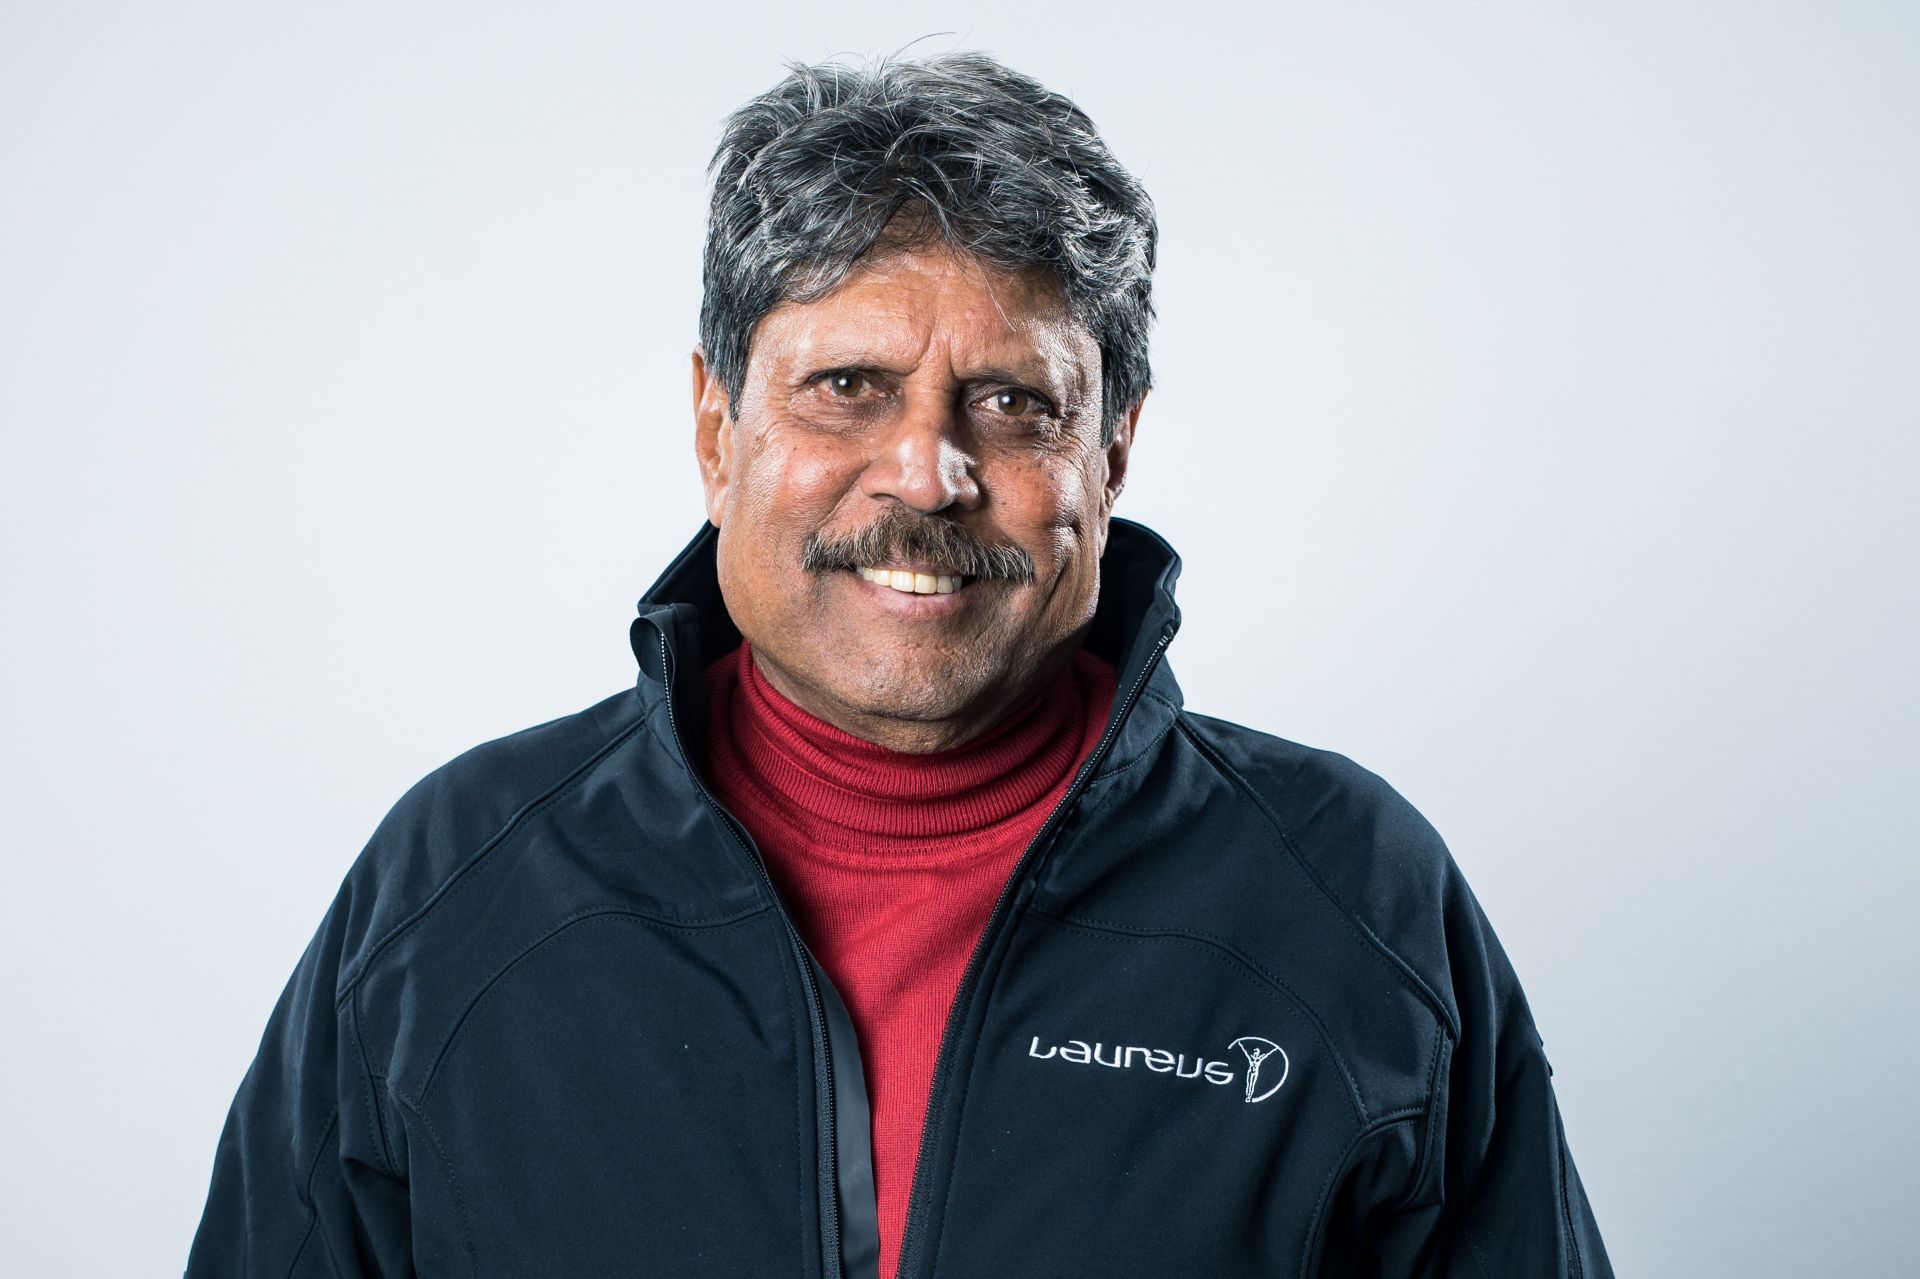 Kapil Dev destroyed the Zimbabwean bowling attack in the 1983 World Cup